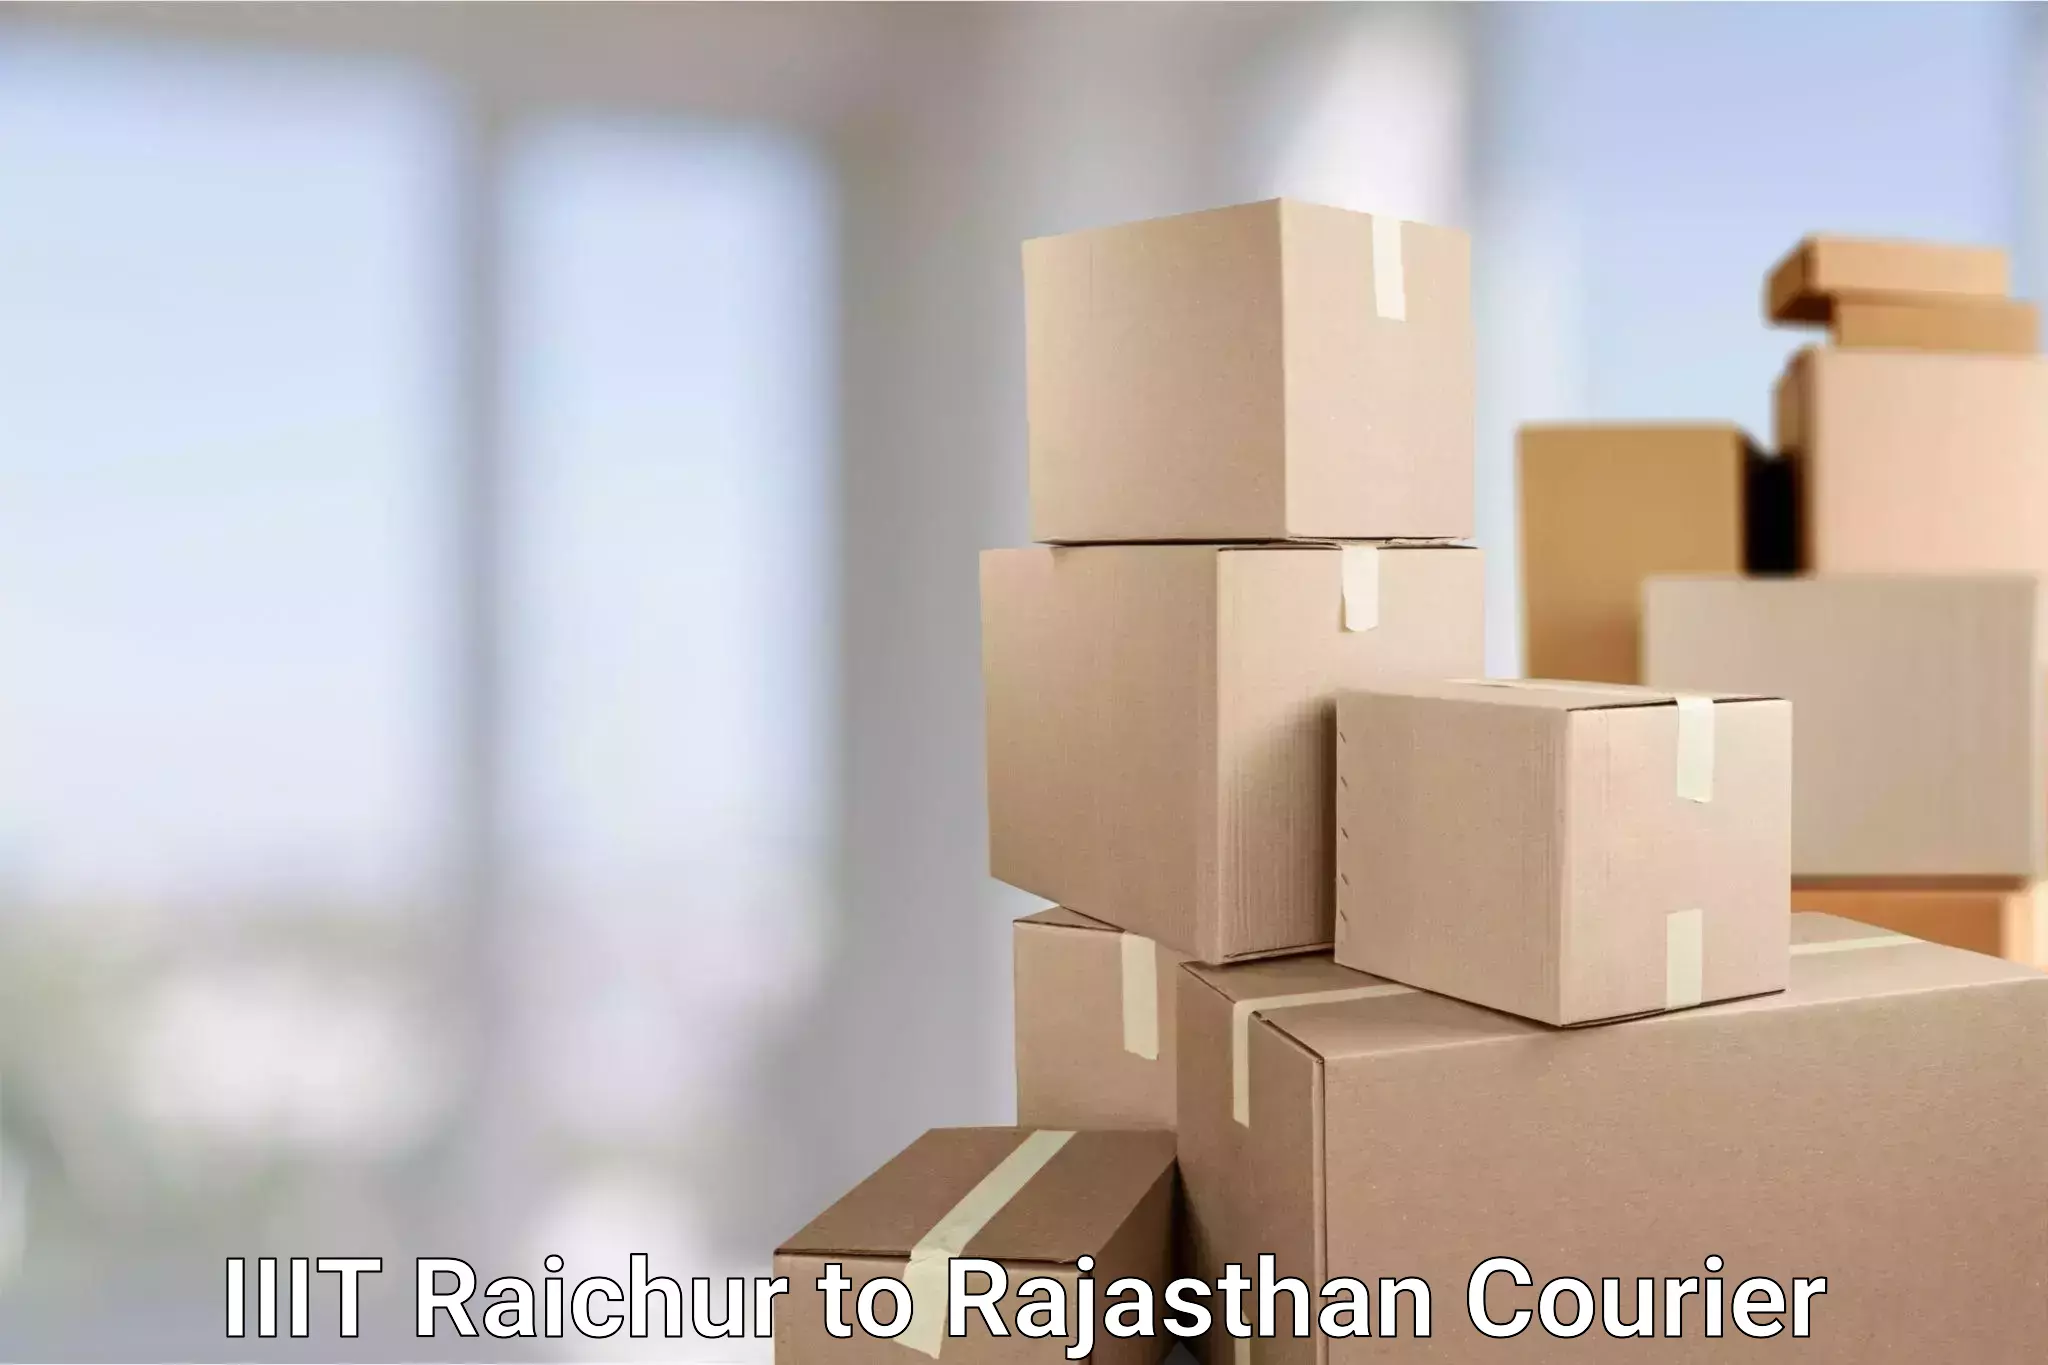 Same-day delivery options IIIT Raichur to Renwal